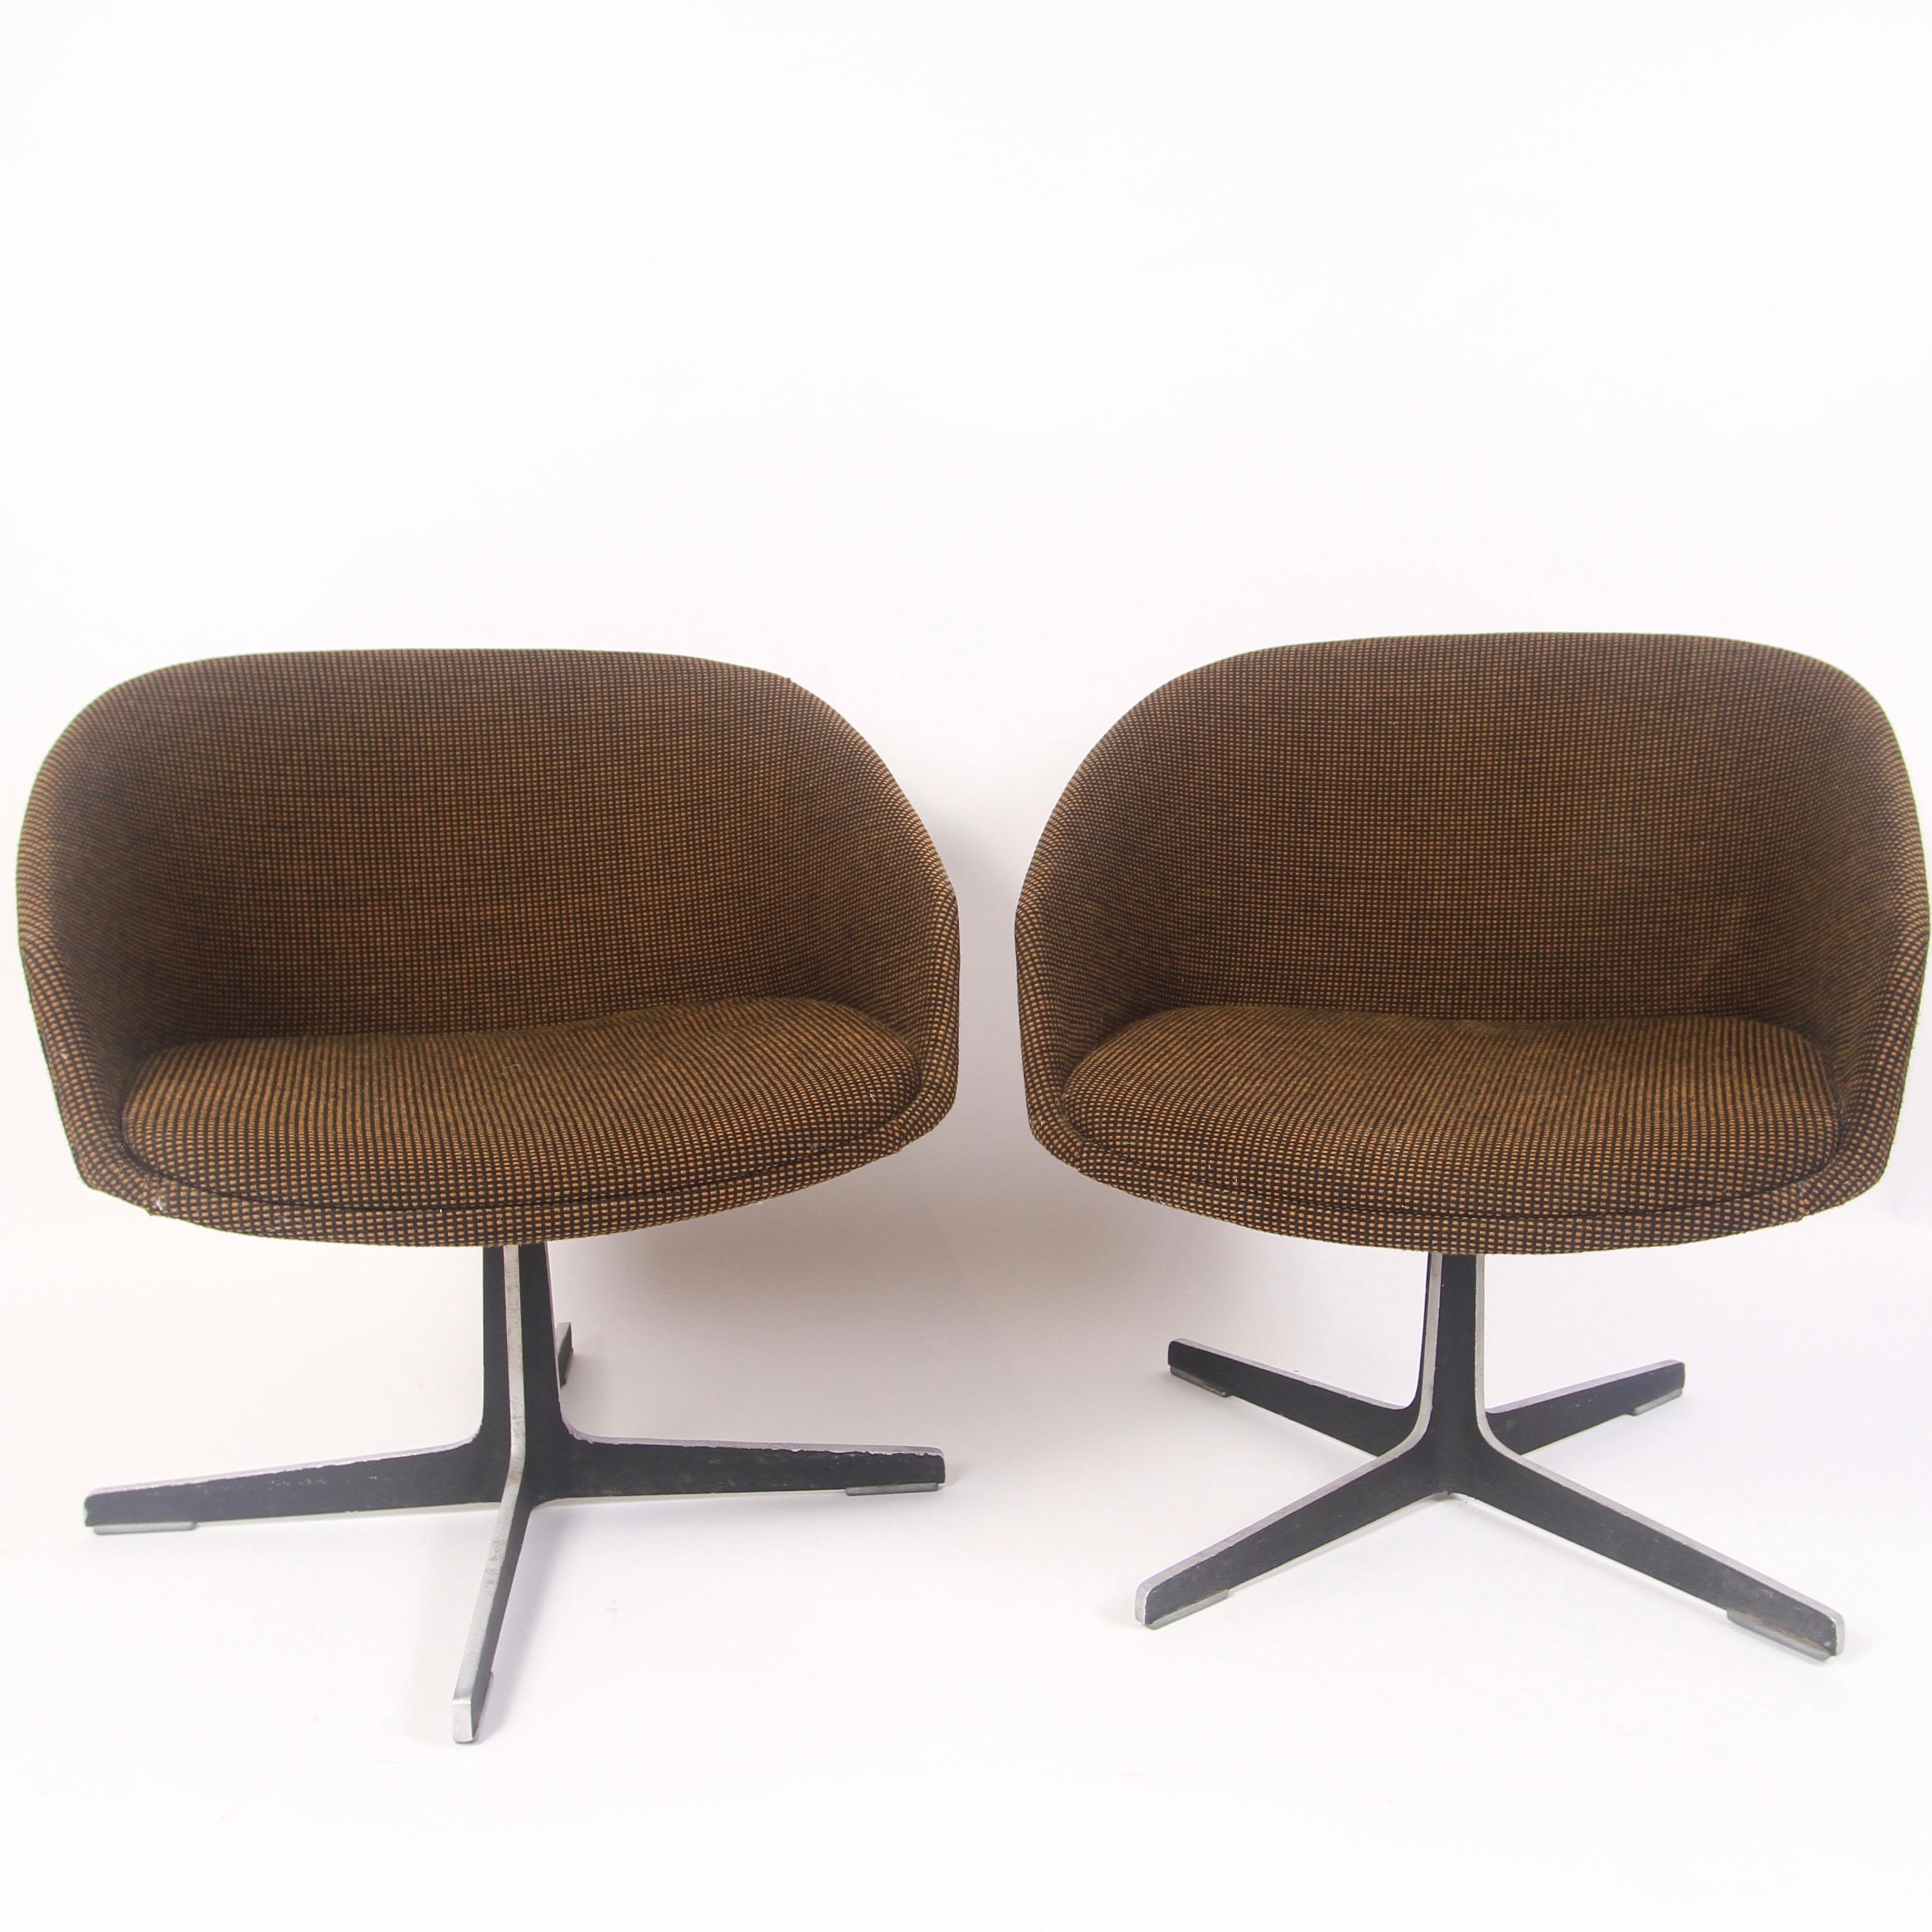 Nice set of 1960s era barrel backed pod chairs with heavy cast steel bases. While original upholstery has held up nicely, it most likely would need recovering.